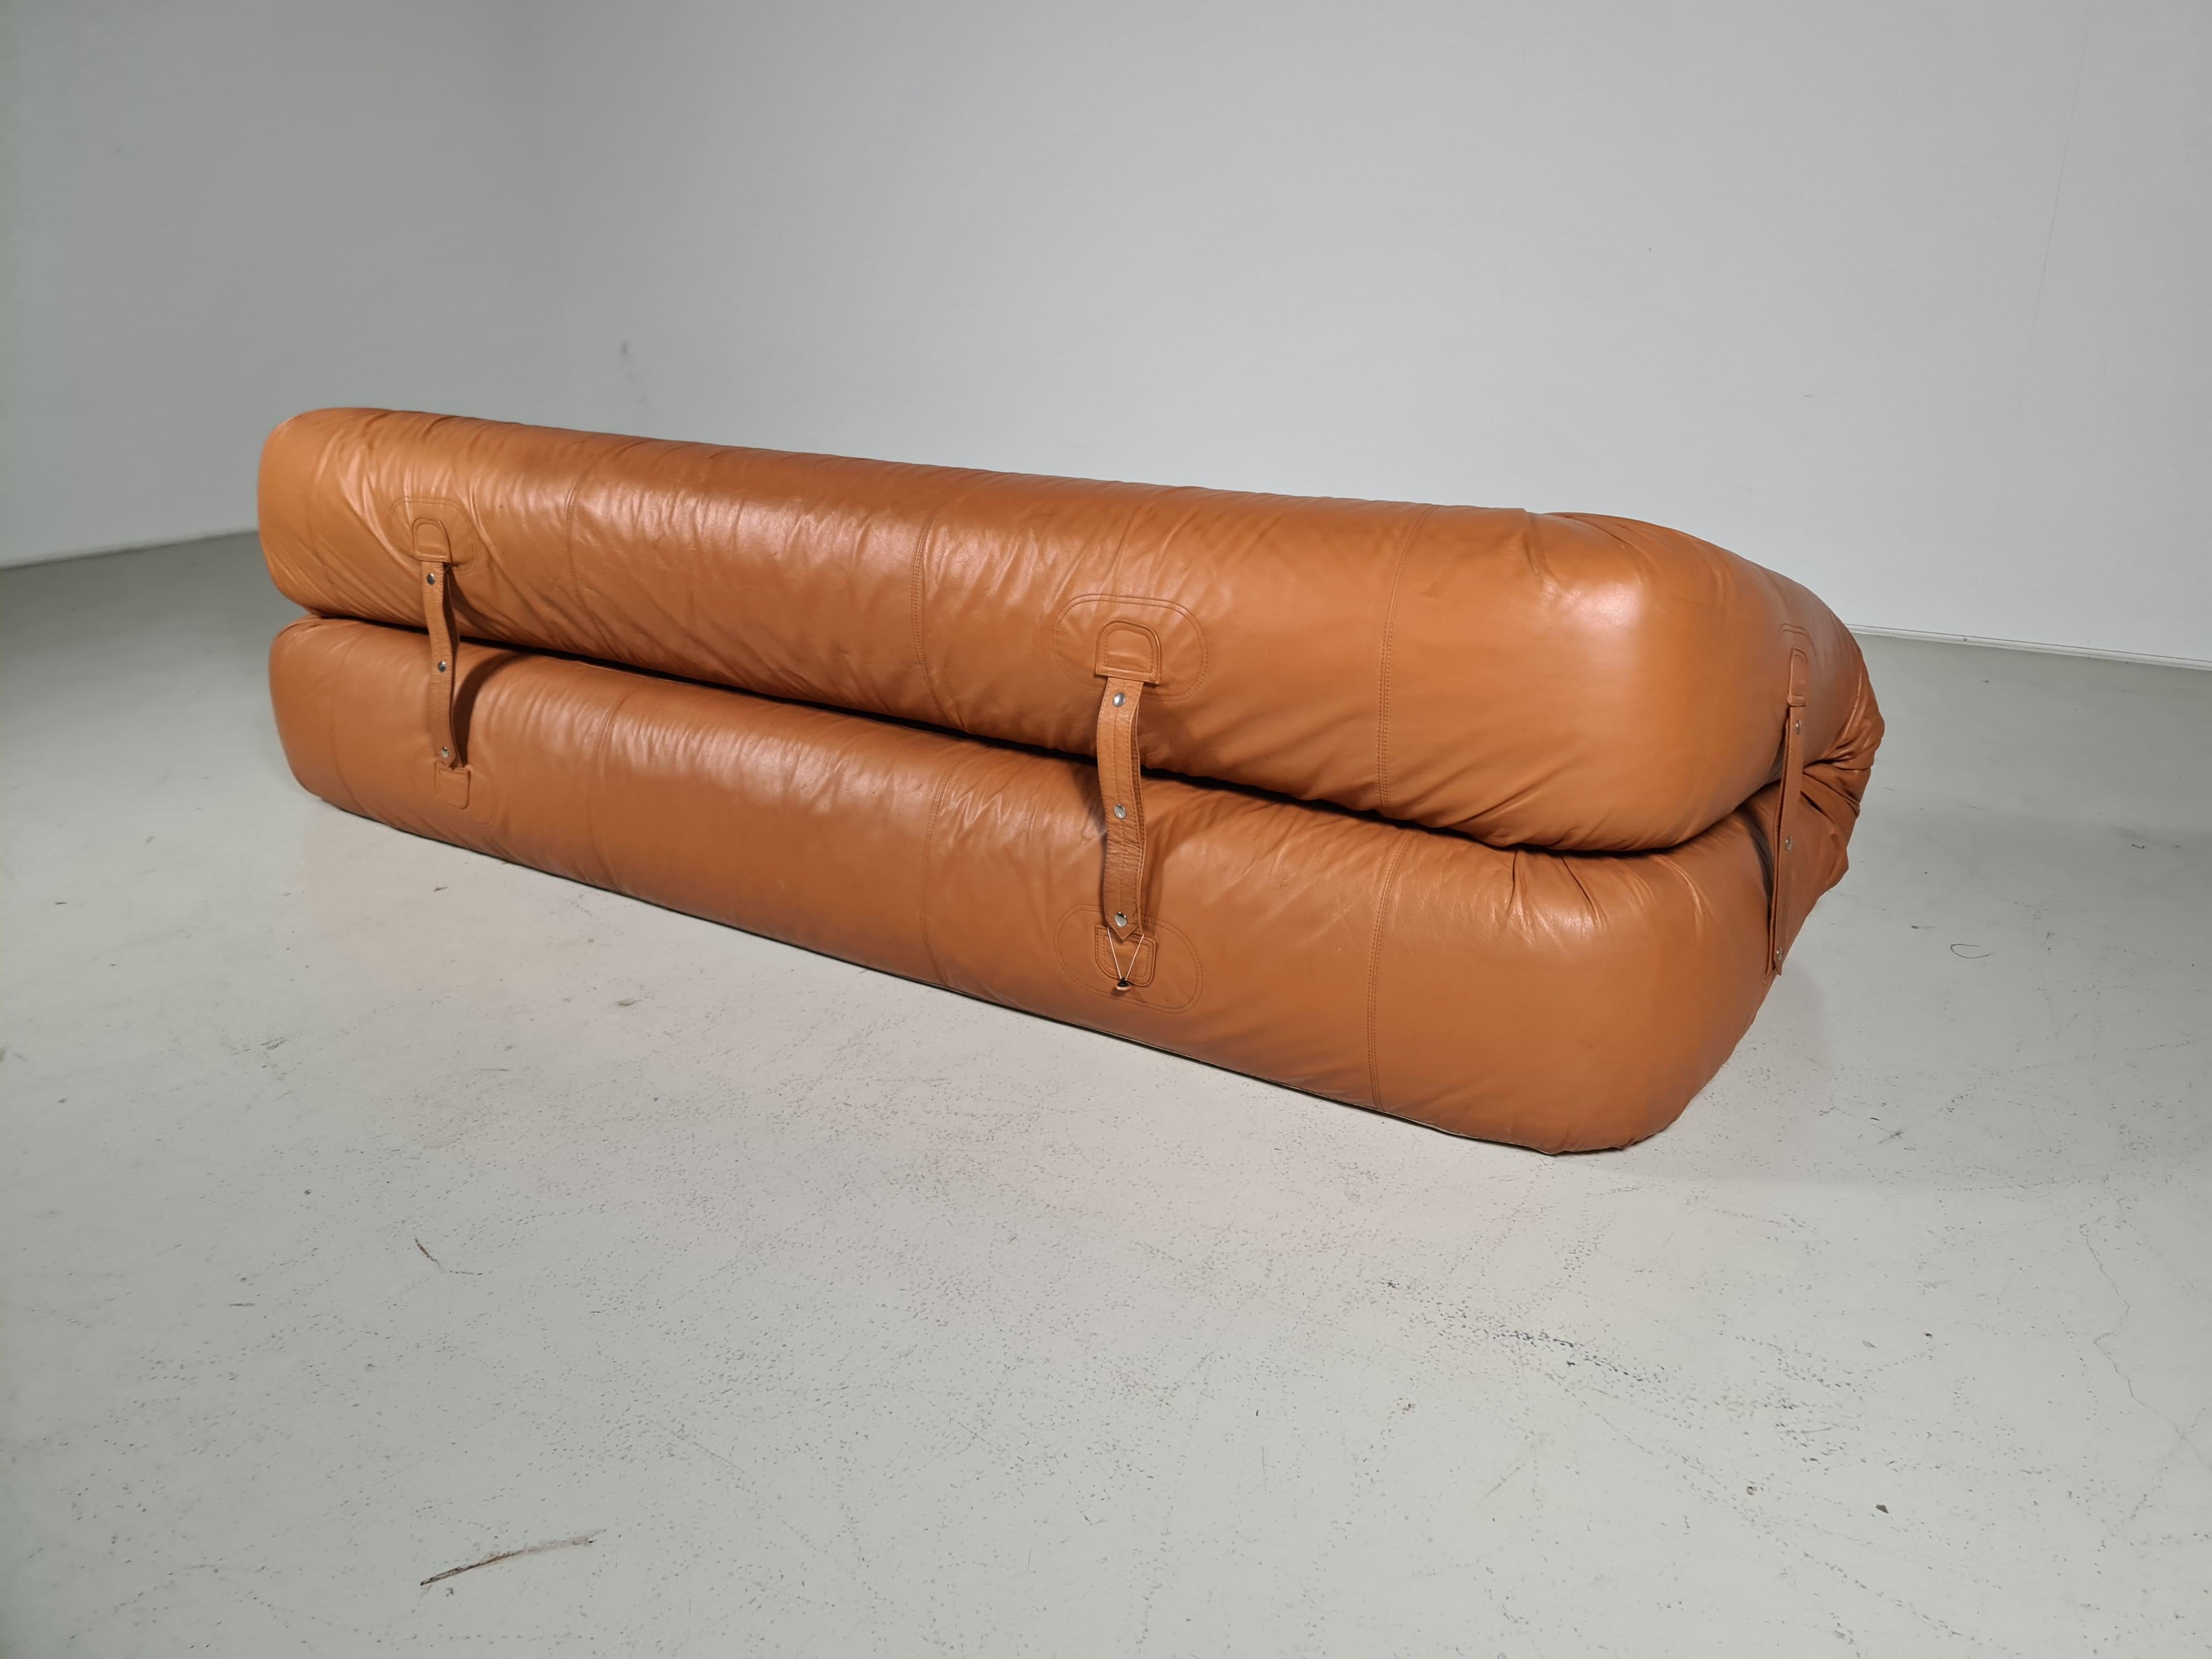 European Anfibio Sofa by Alessandro Becchi for Giovanetti in Cognac Leather, 1970s